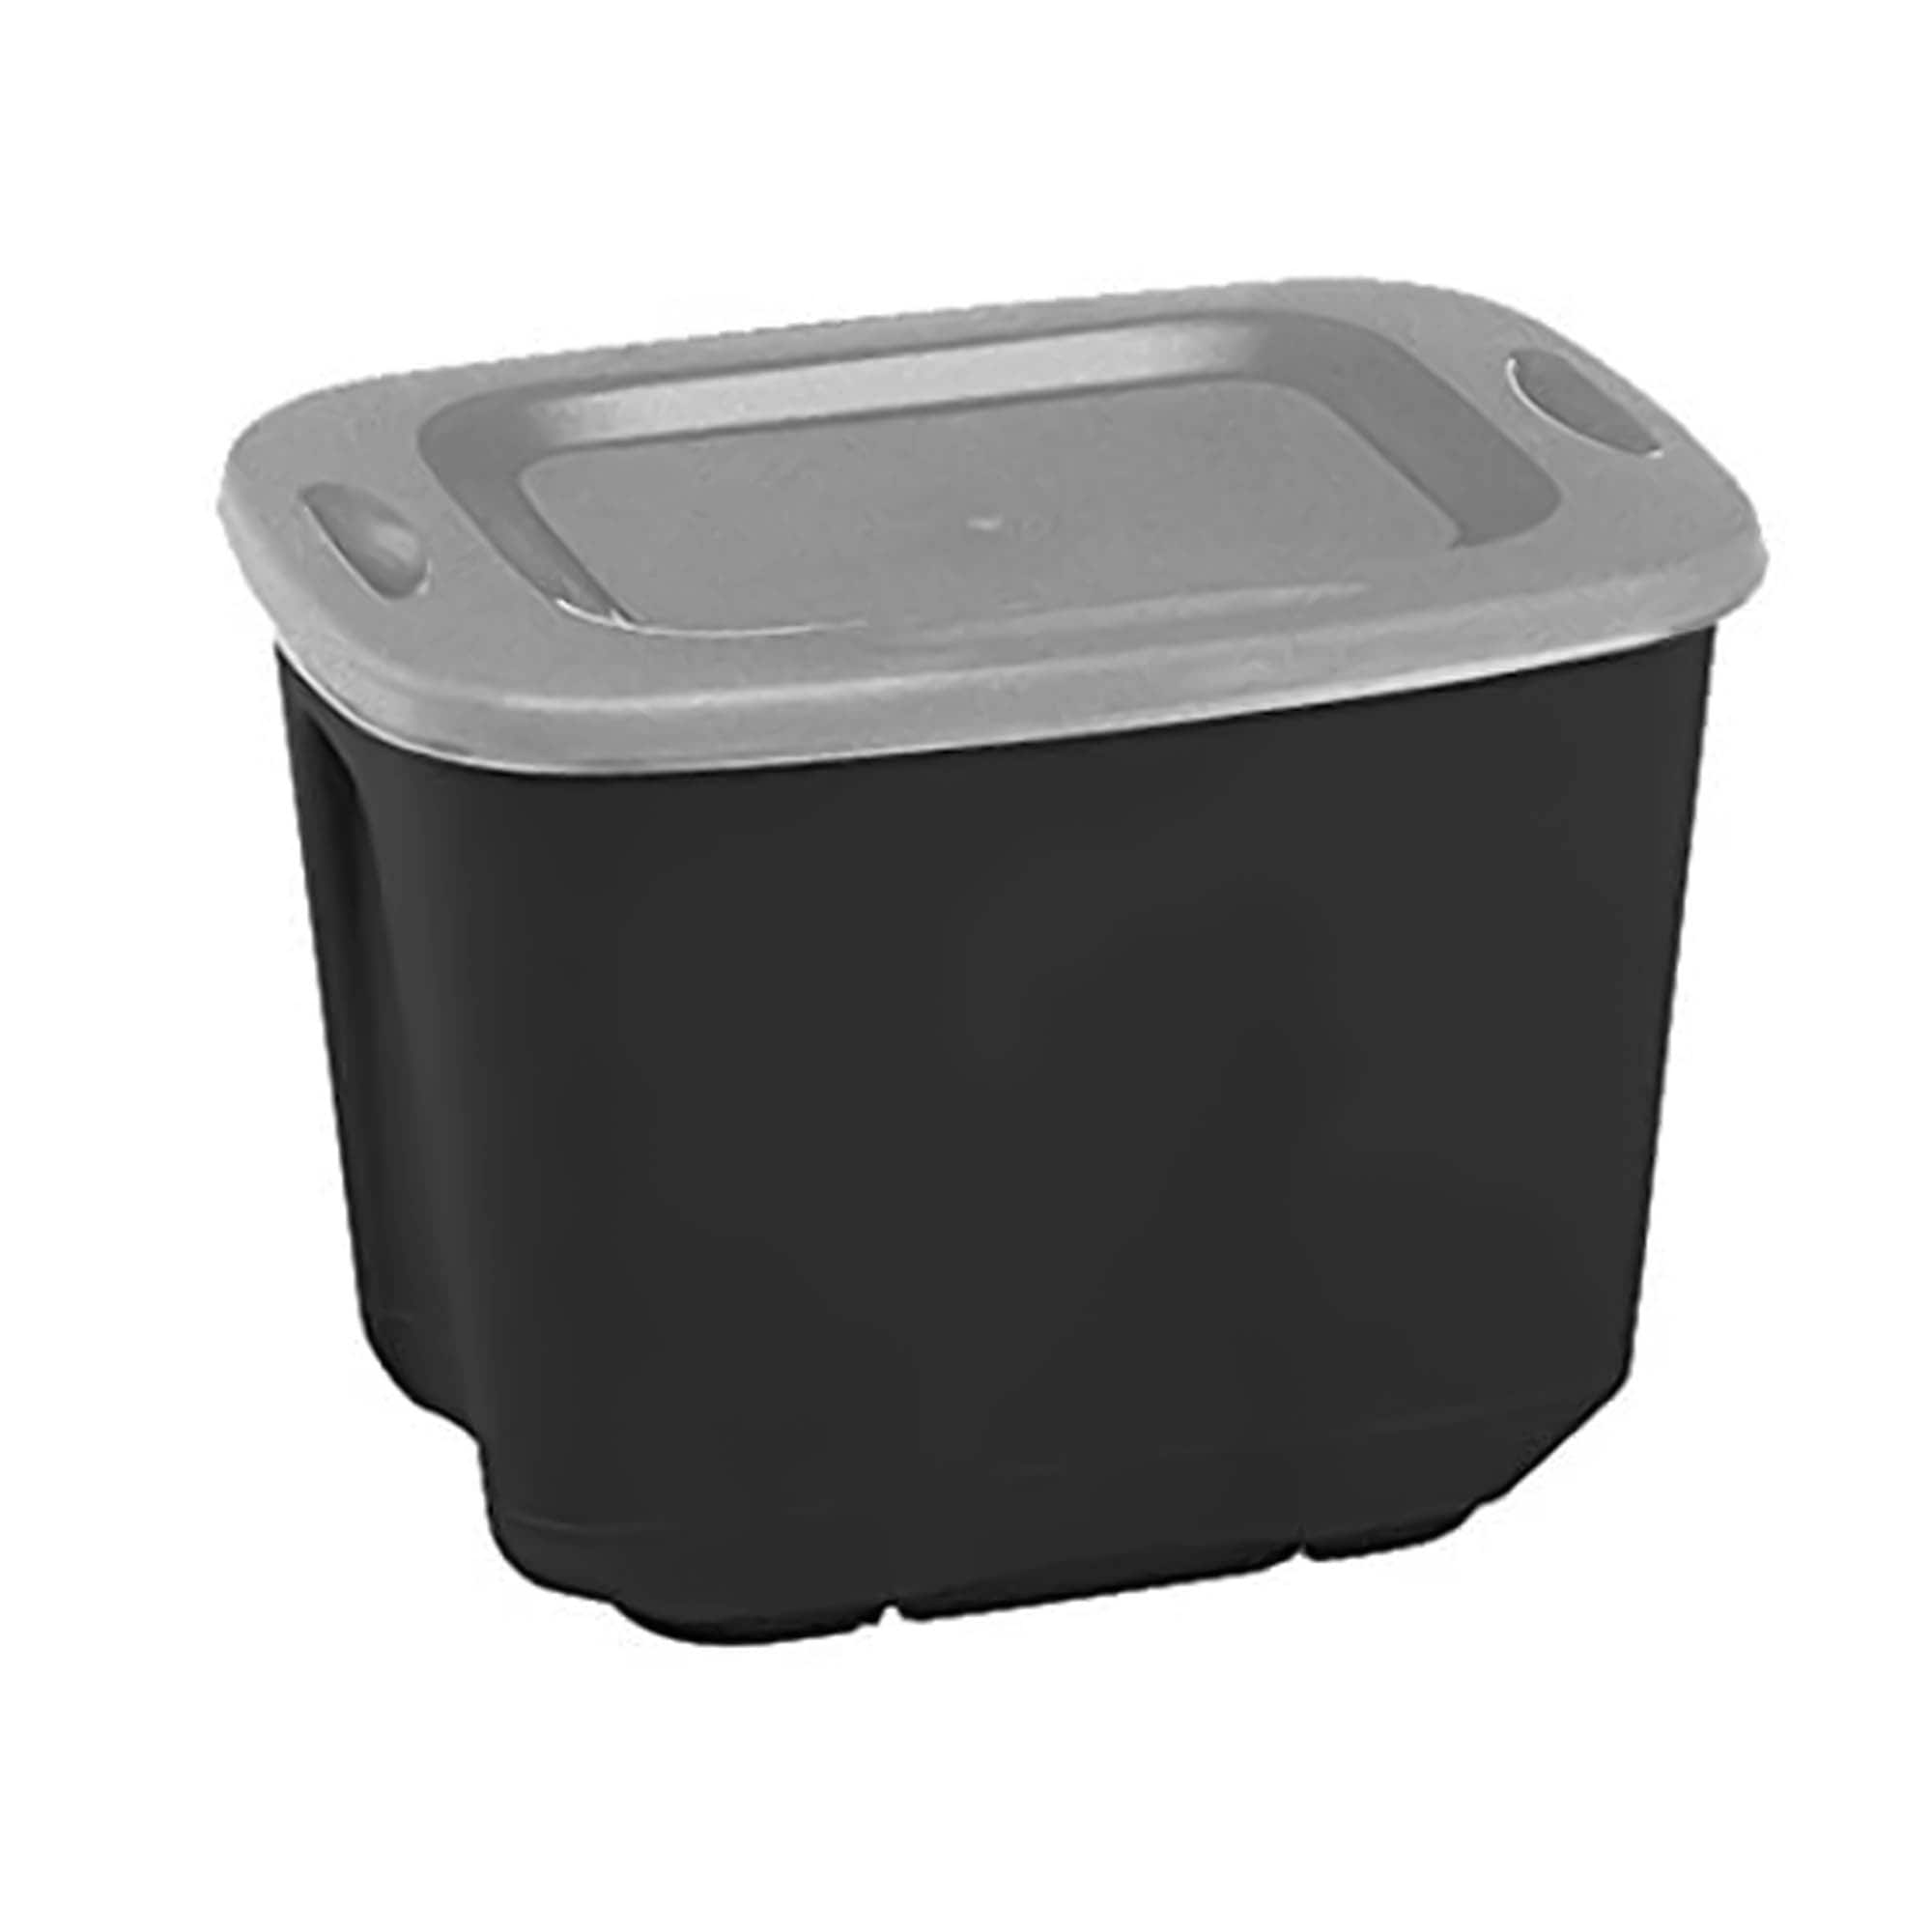 Homz Products Large 10-Gallons Lid Snap Black Tote (40-Quart) Standard at with